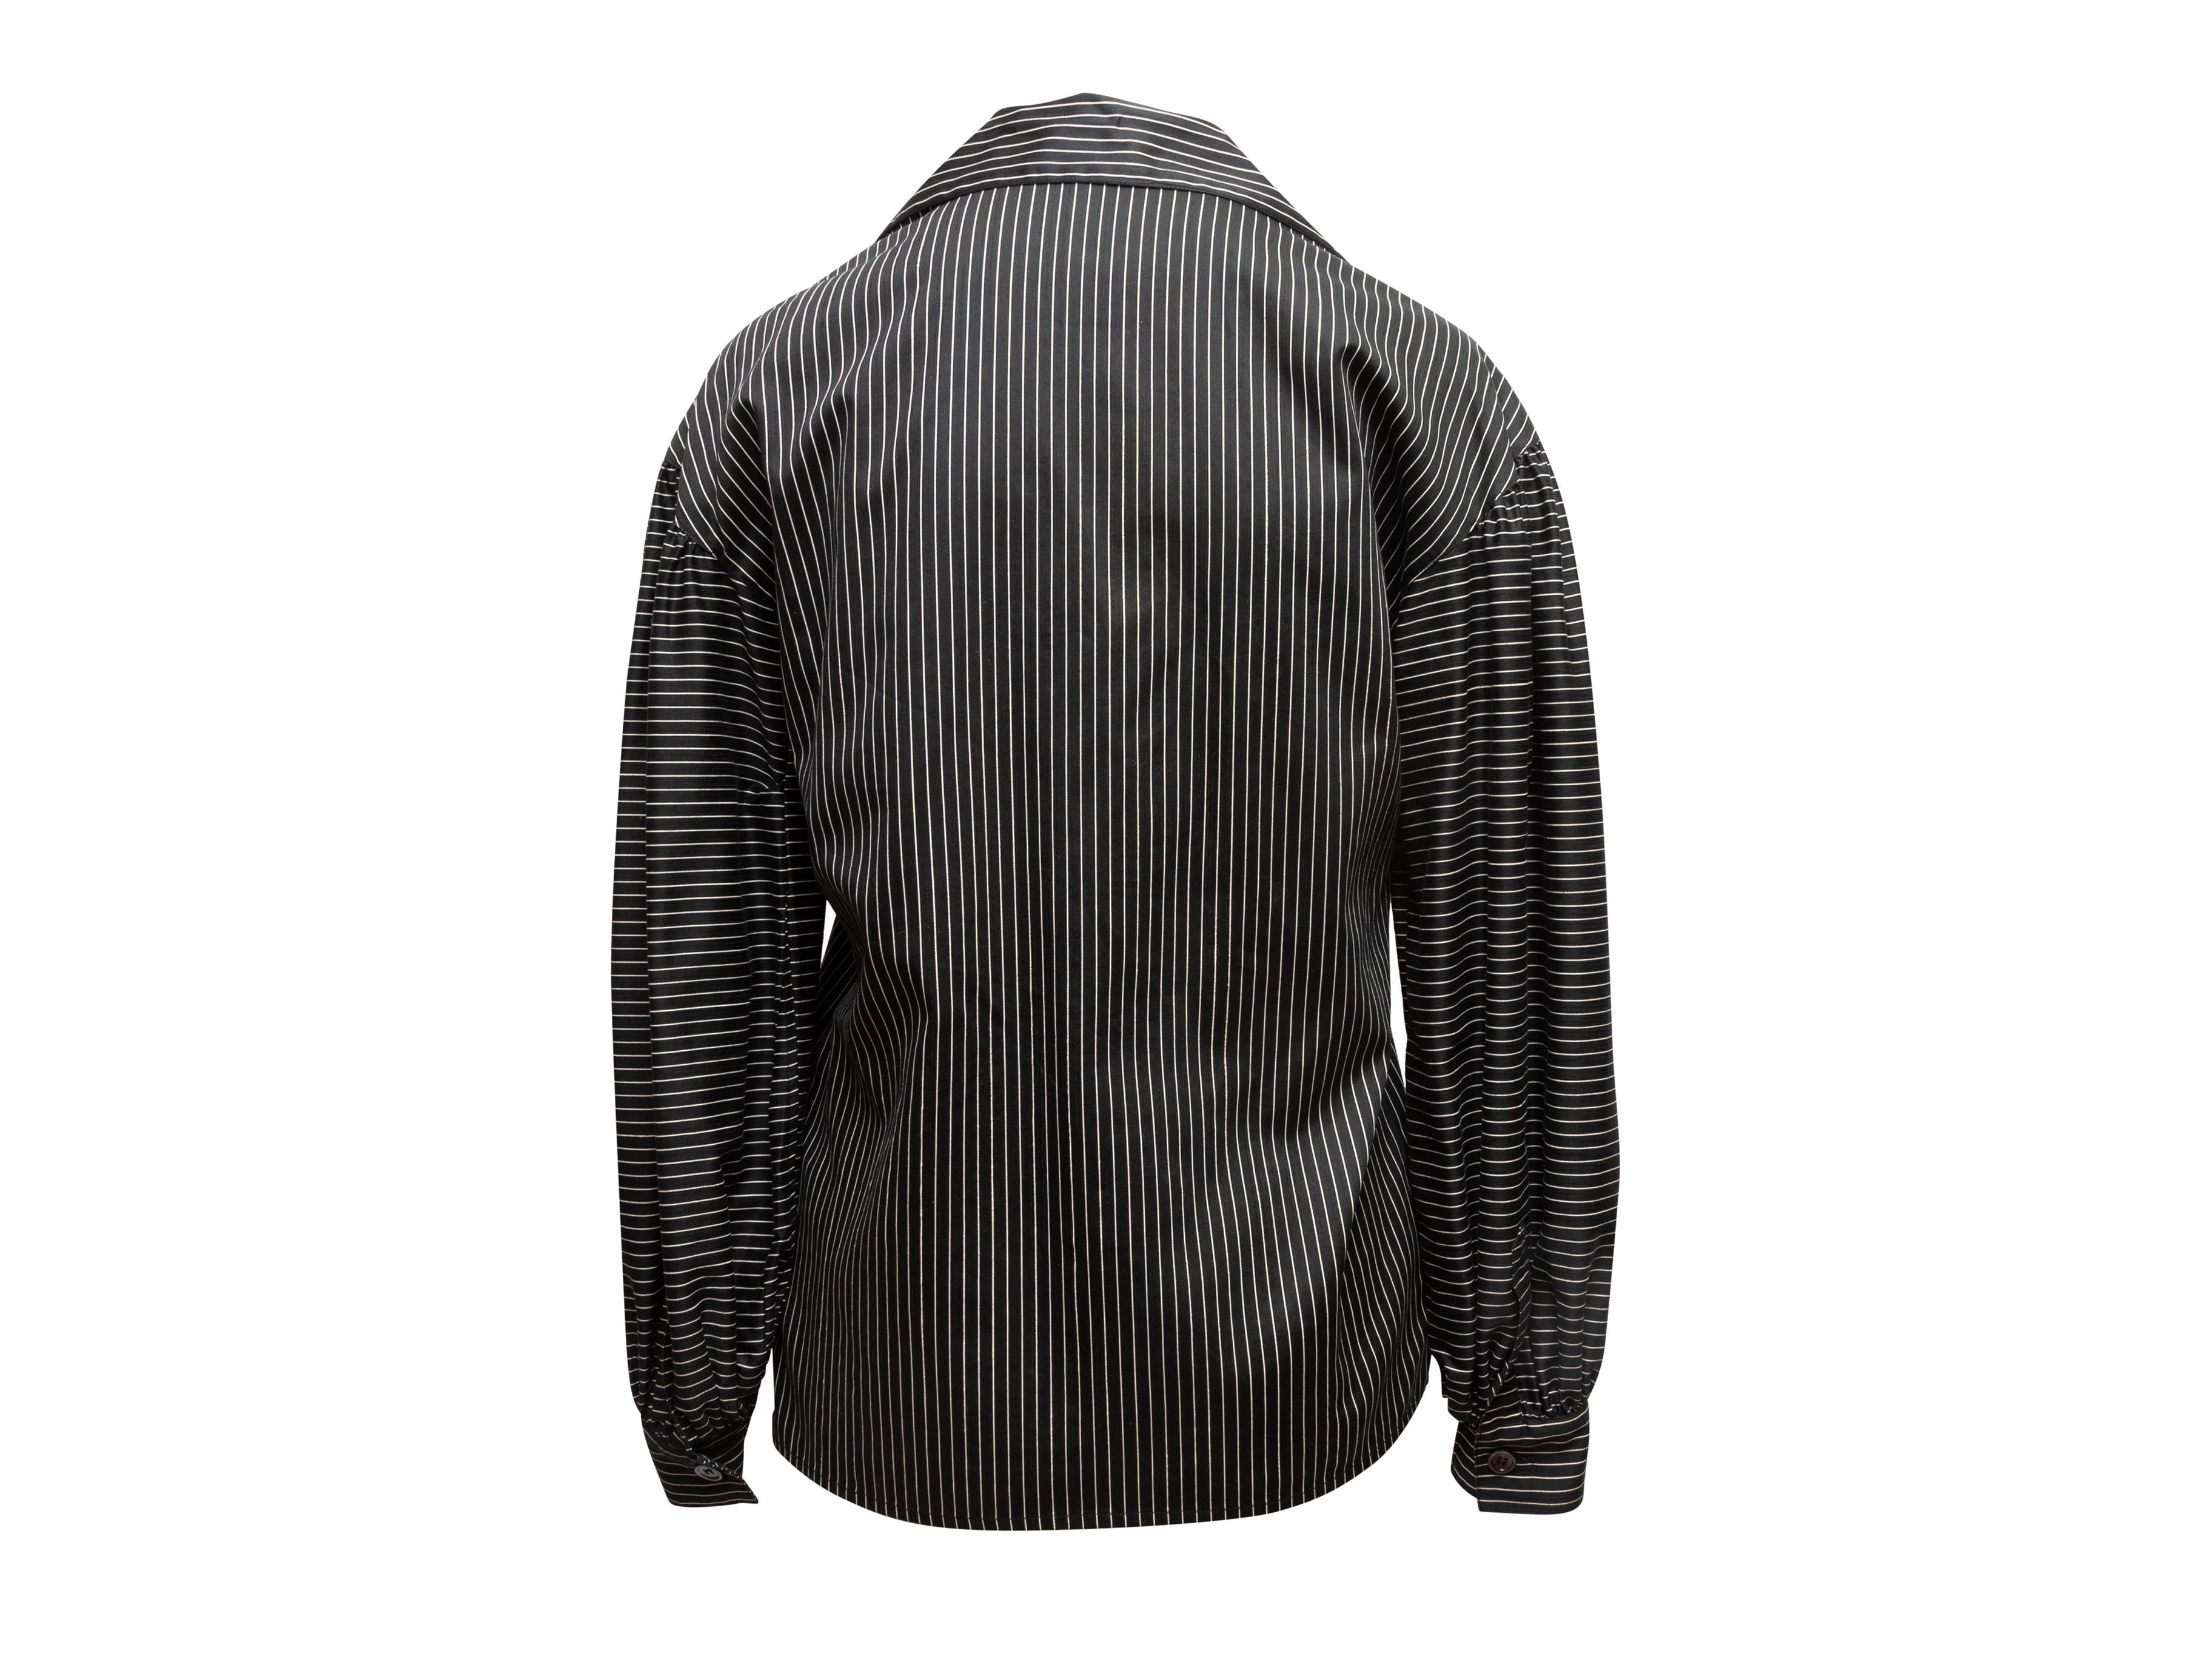 Saint Laurent Vintage Black & White Pinstripe Button-Up Top In Good Condition For Sale In New York, NY